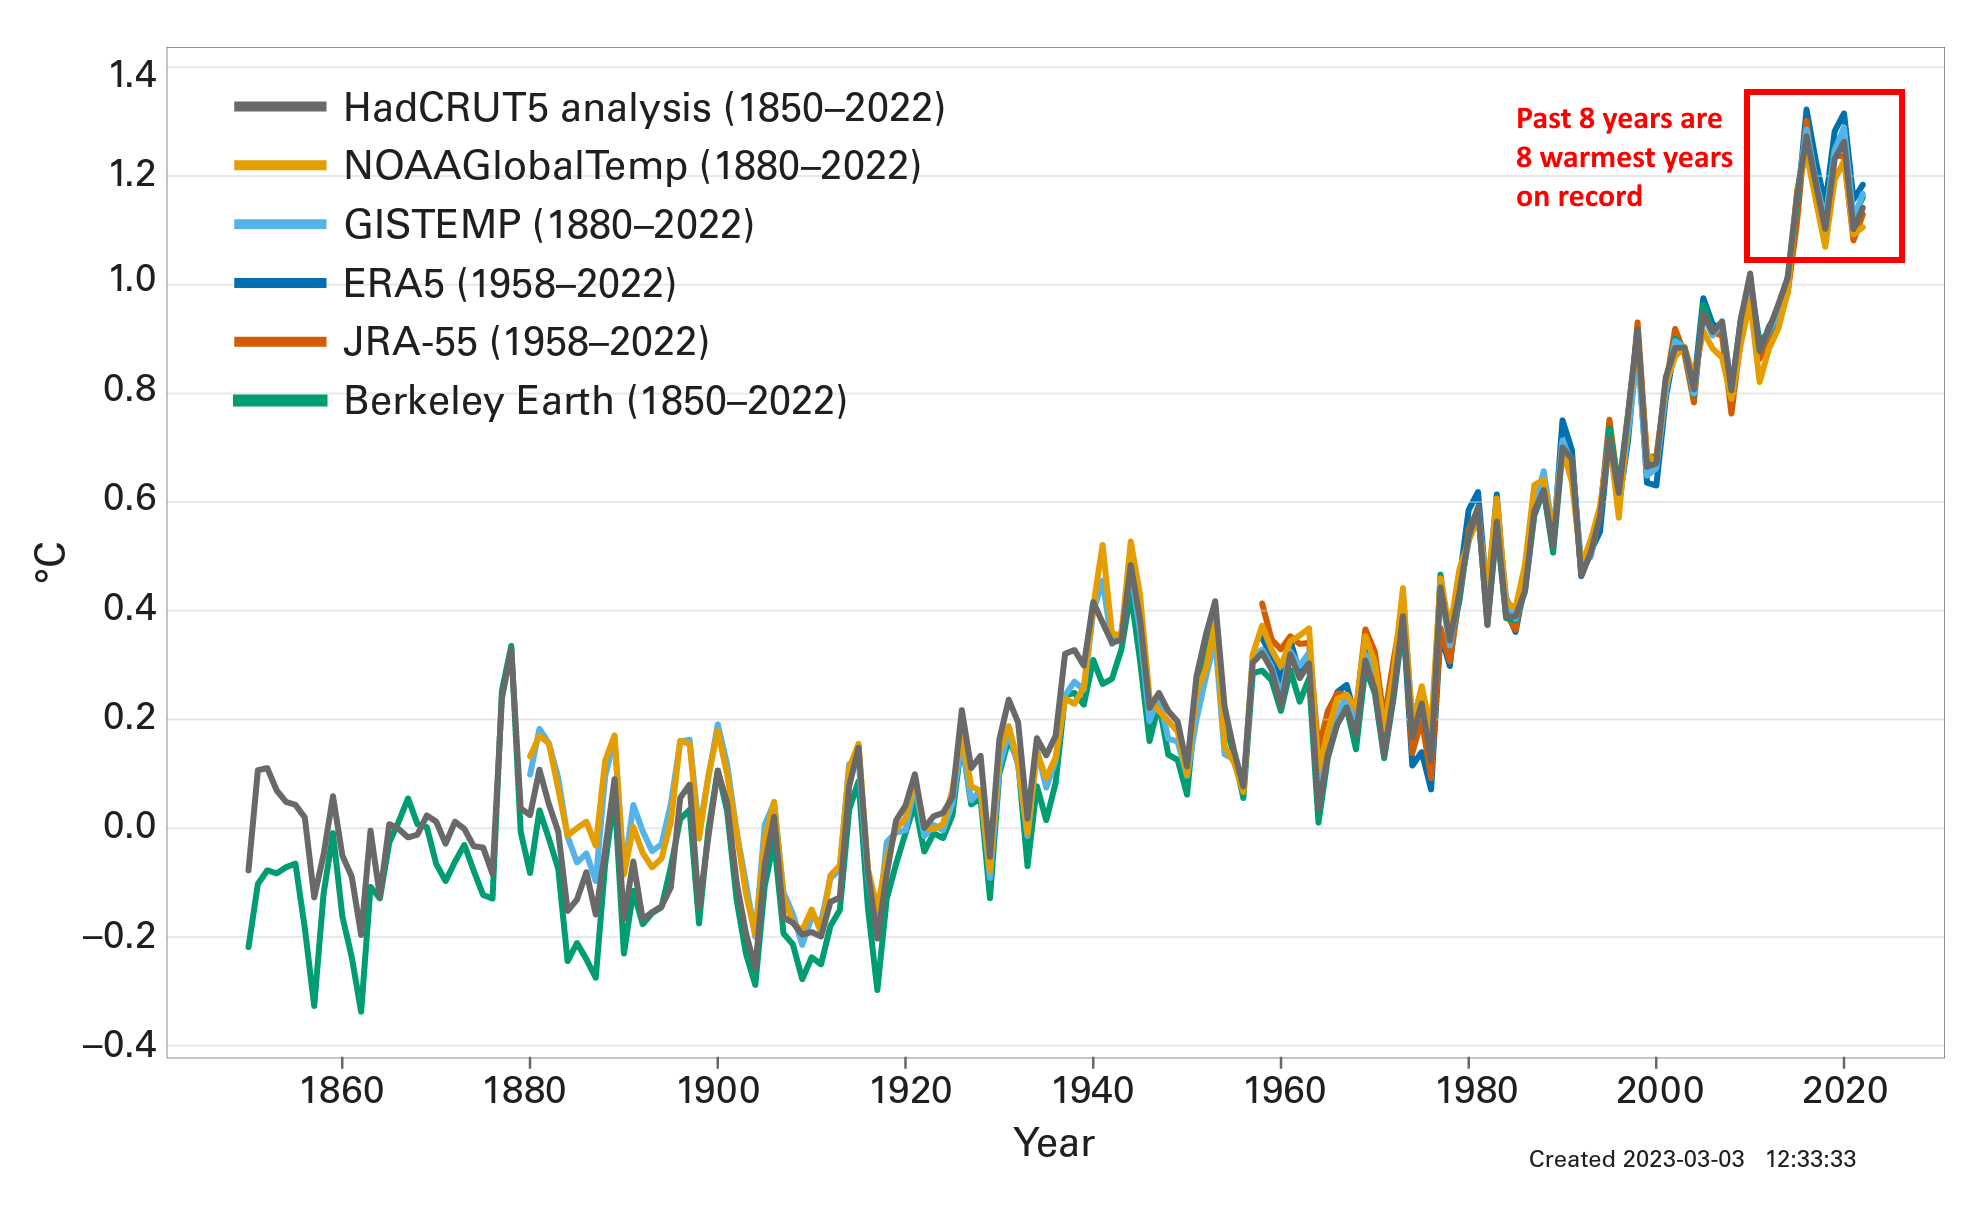 Global annual mean temperature anomalies with respect to pre-industrial conditions (1850-1900) for six global temperature data sets (1850-2022). Graphic: WMO